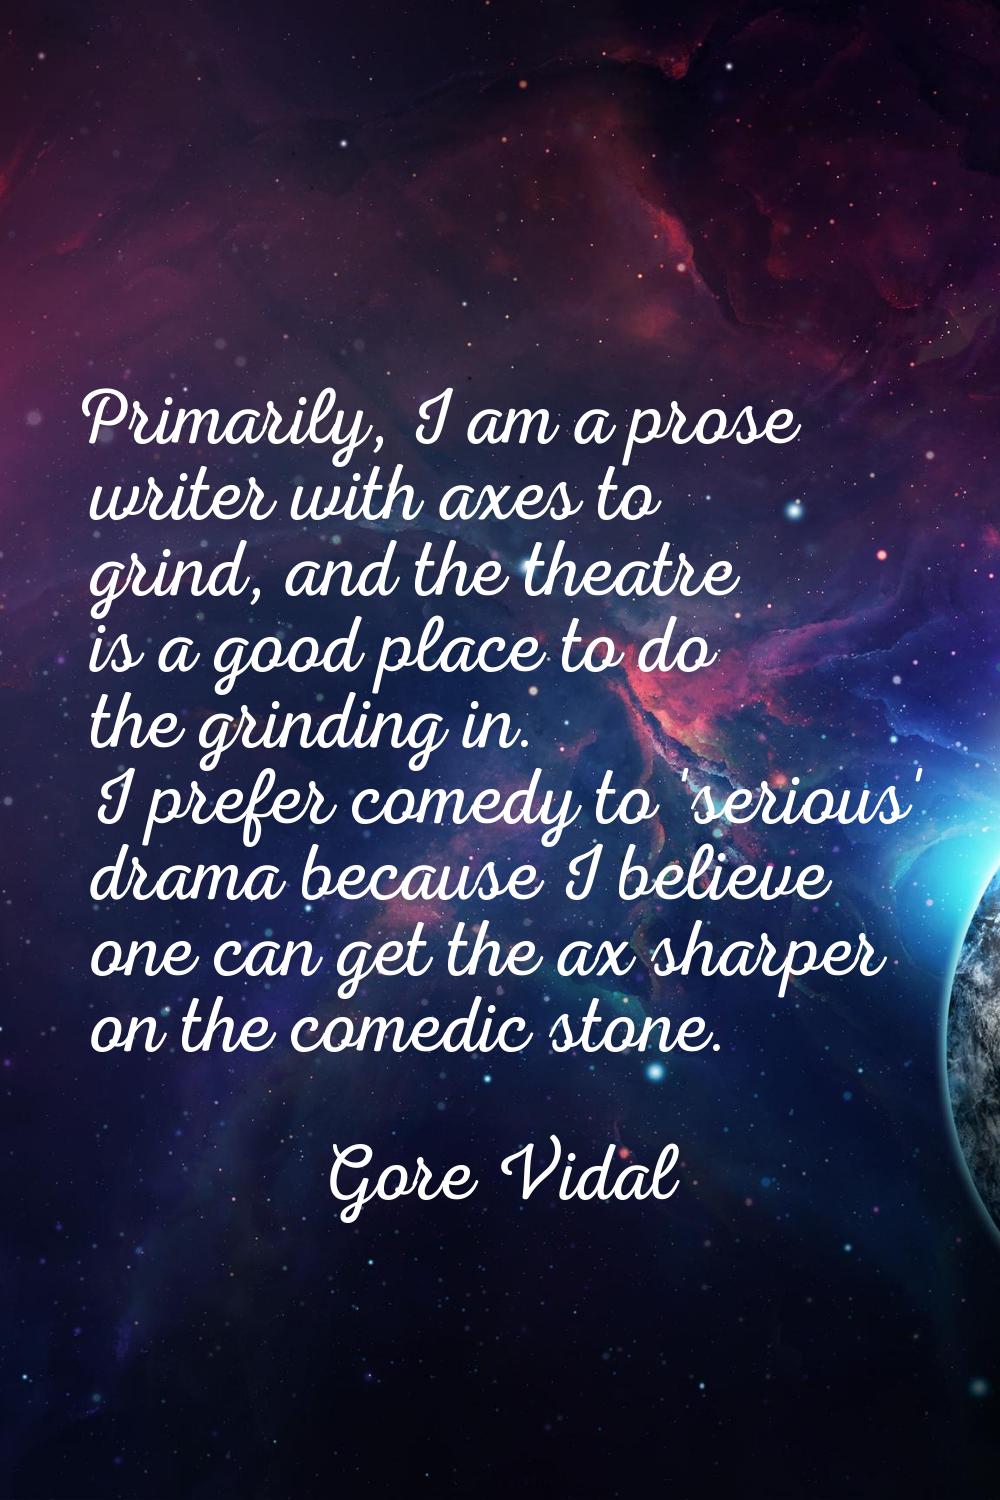 Primarily, I am a prose writer with axes to grind, and the theatre is a good place to do the grindi